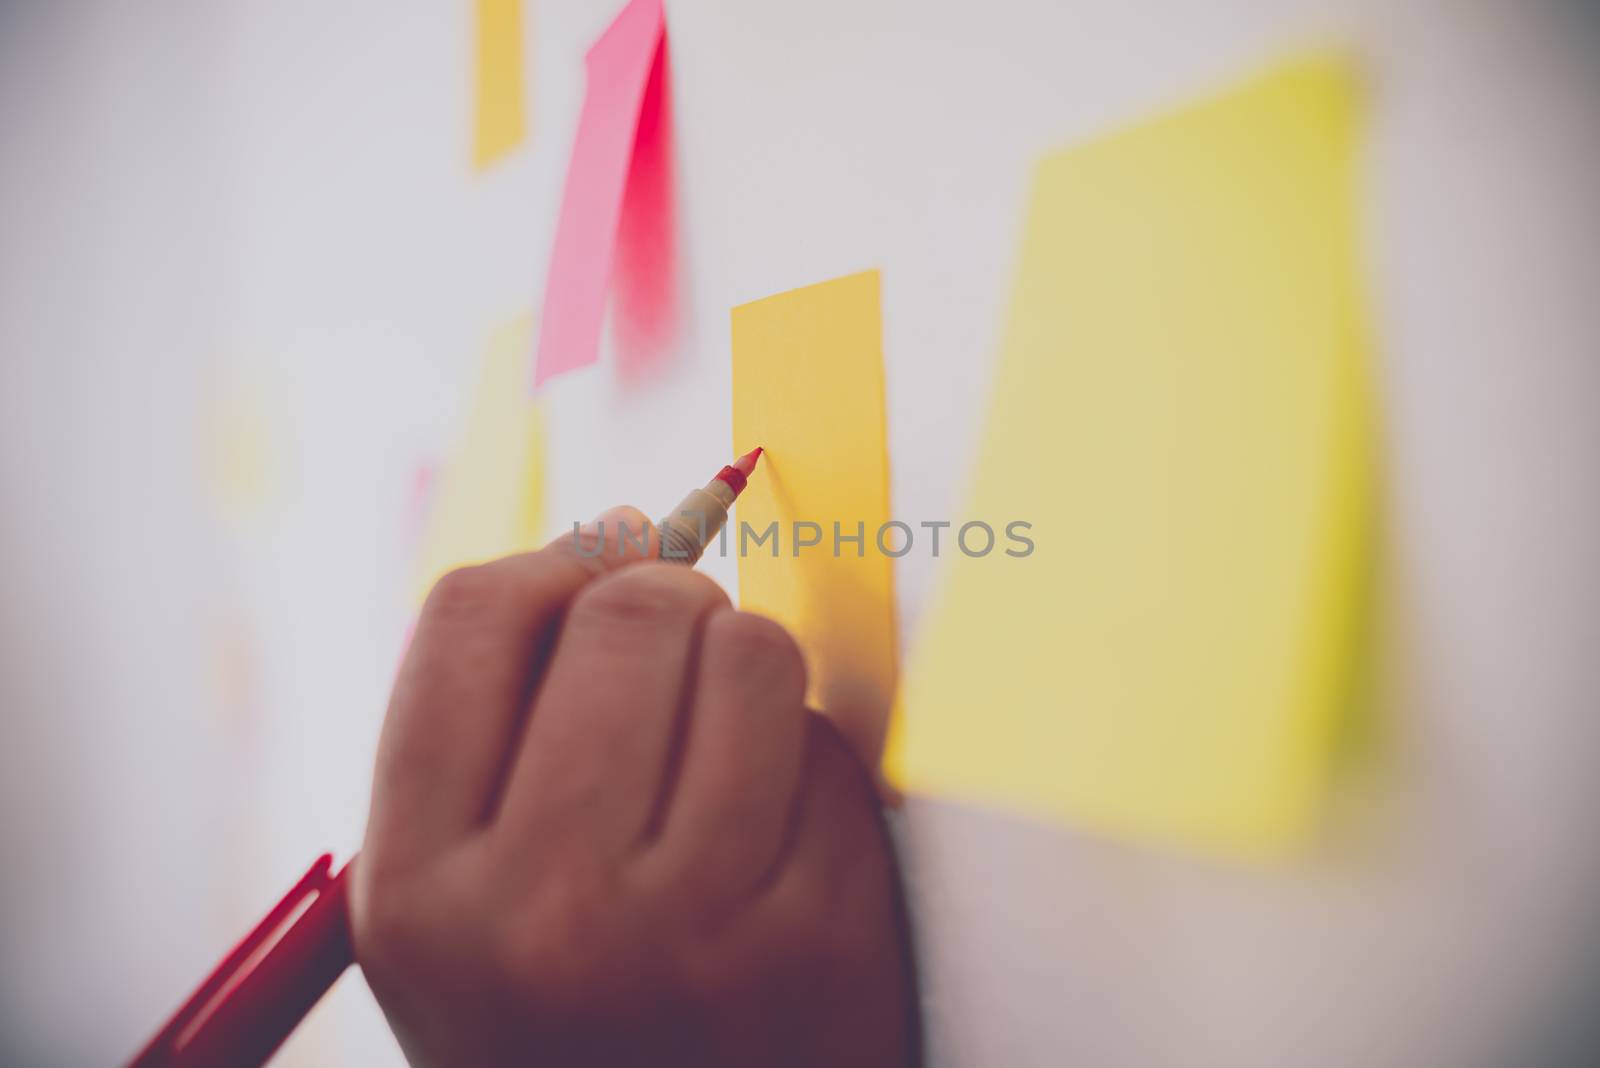 The hand is holding the post it notes attached to the wall. Conc by photobyphotoboy